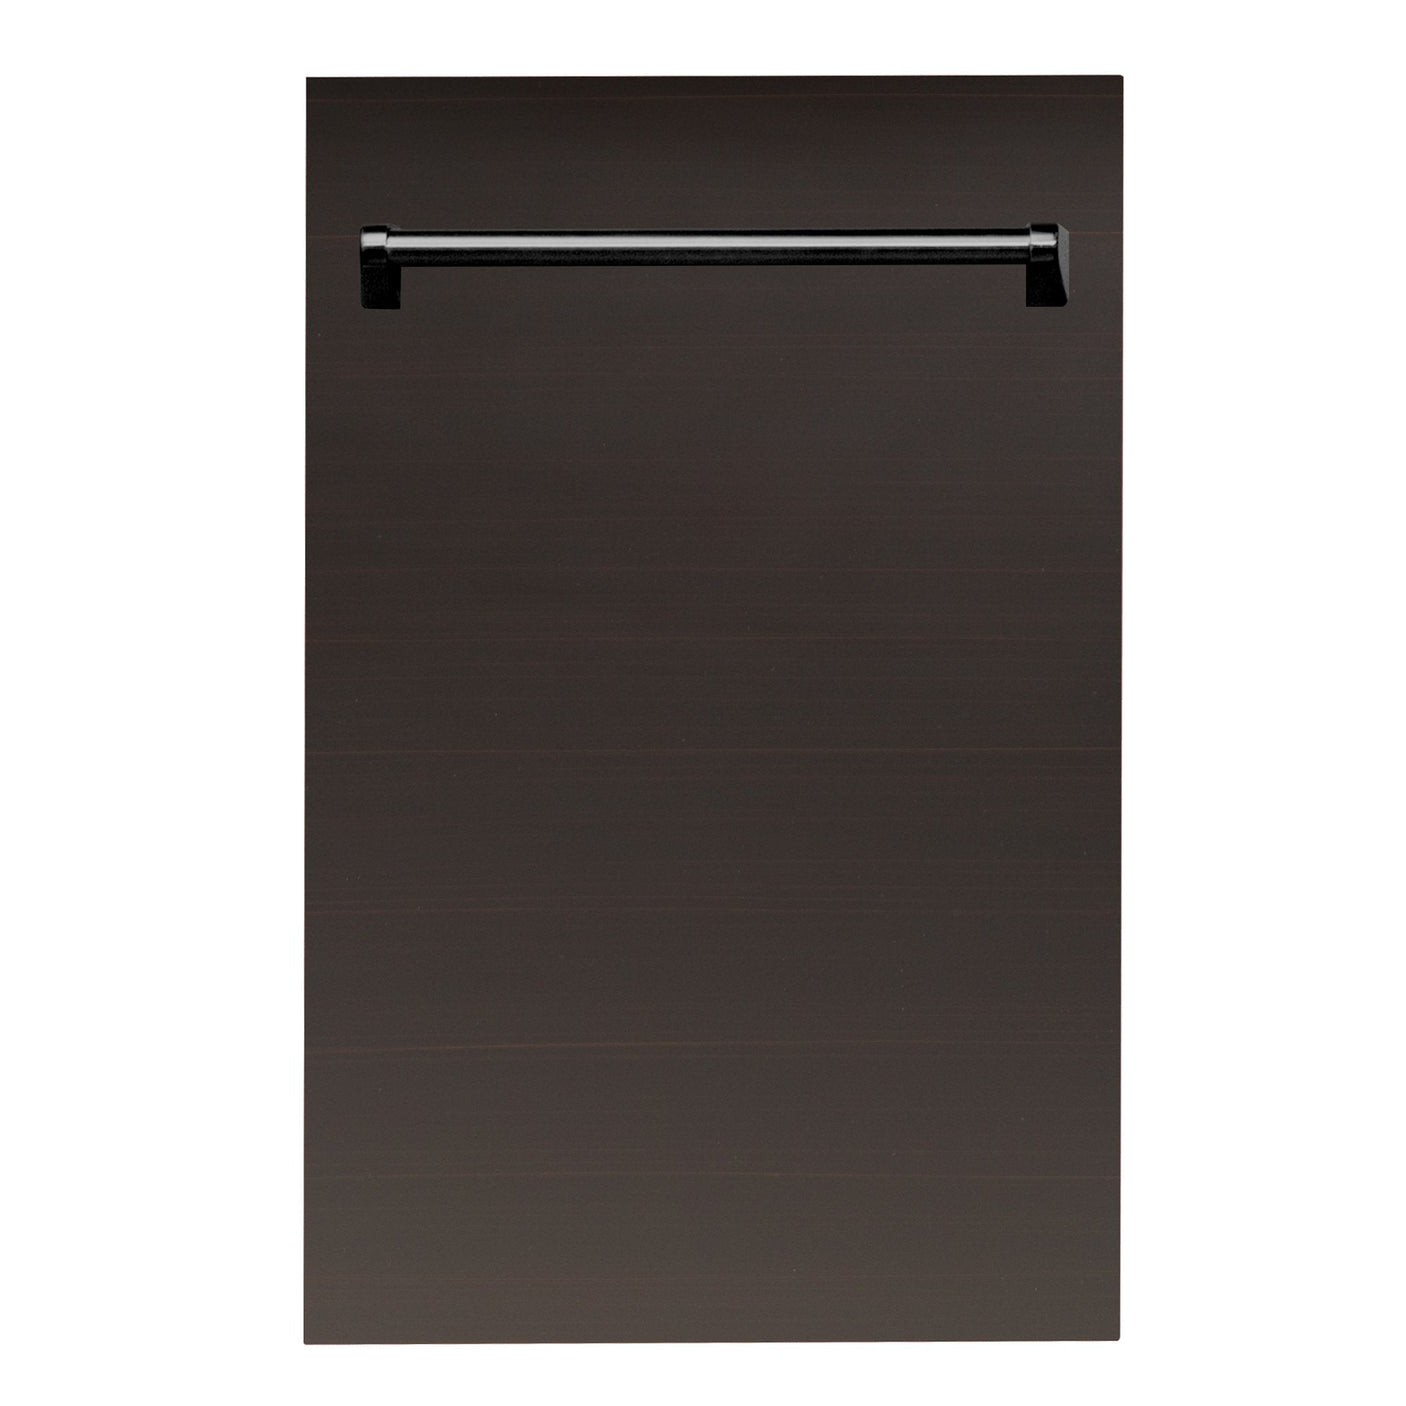 ZLINE 18 in. Dishwasher Panel with Traditional Handle (DP-18) [Color: Unfinished Wood]